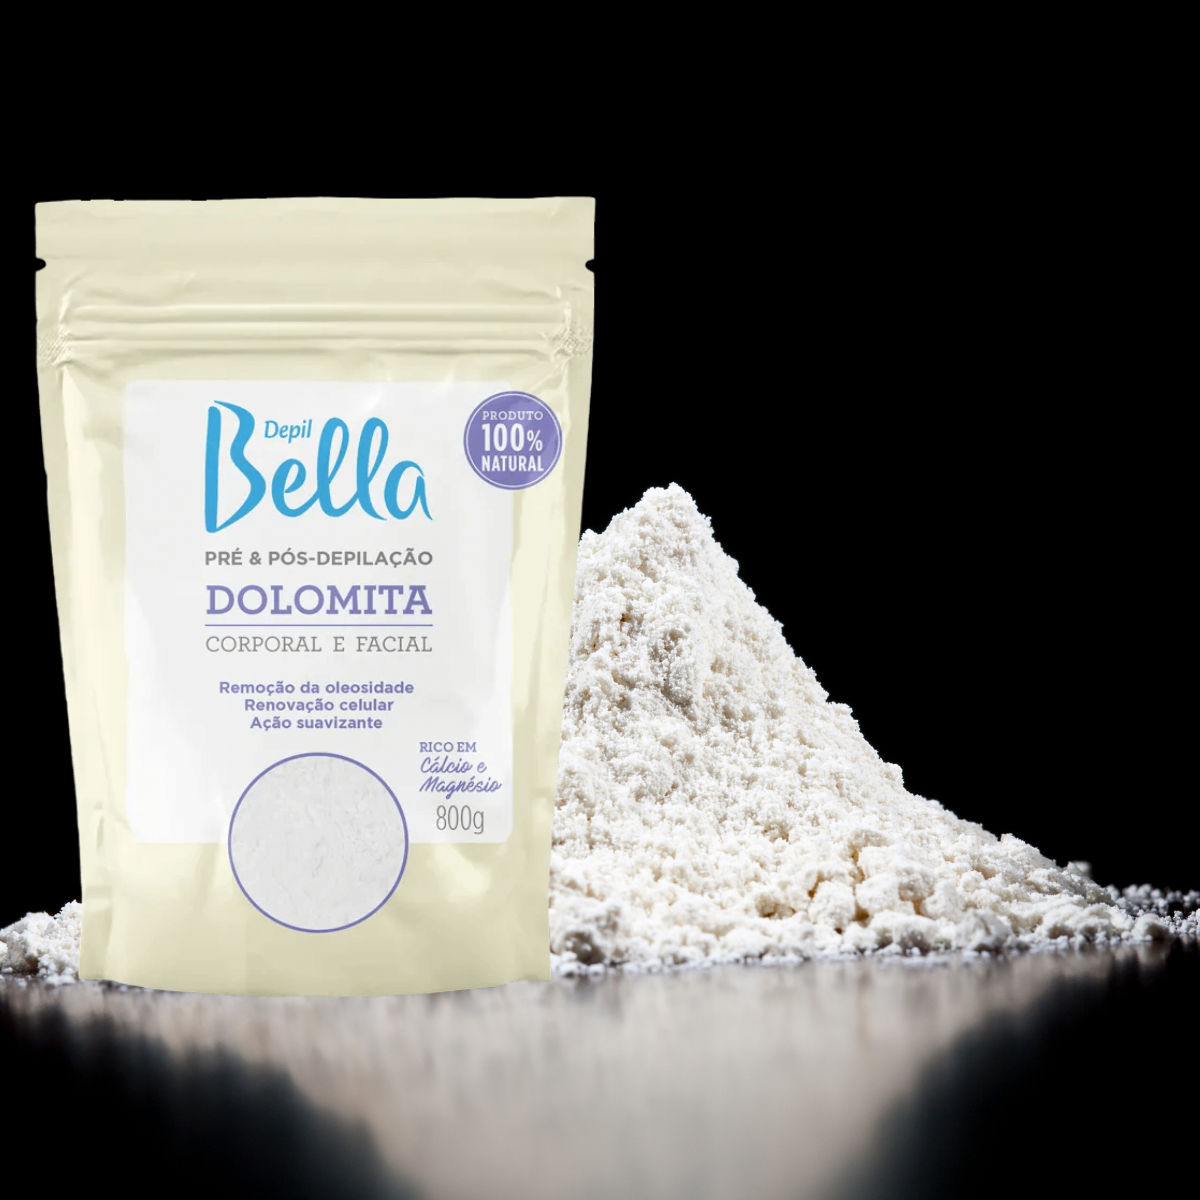 Depil Bella Dolomite Powder for Pre and Post Waxing, Body and Facial  - 800G - depilcompany